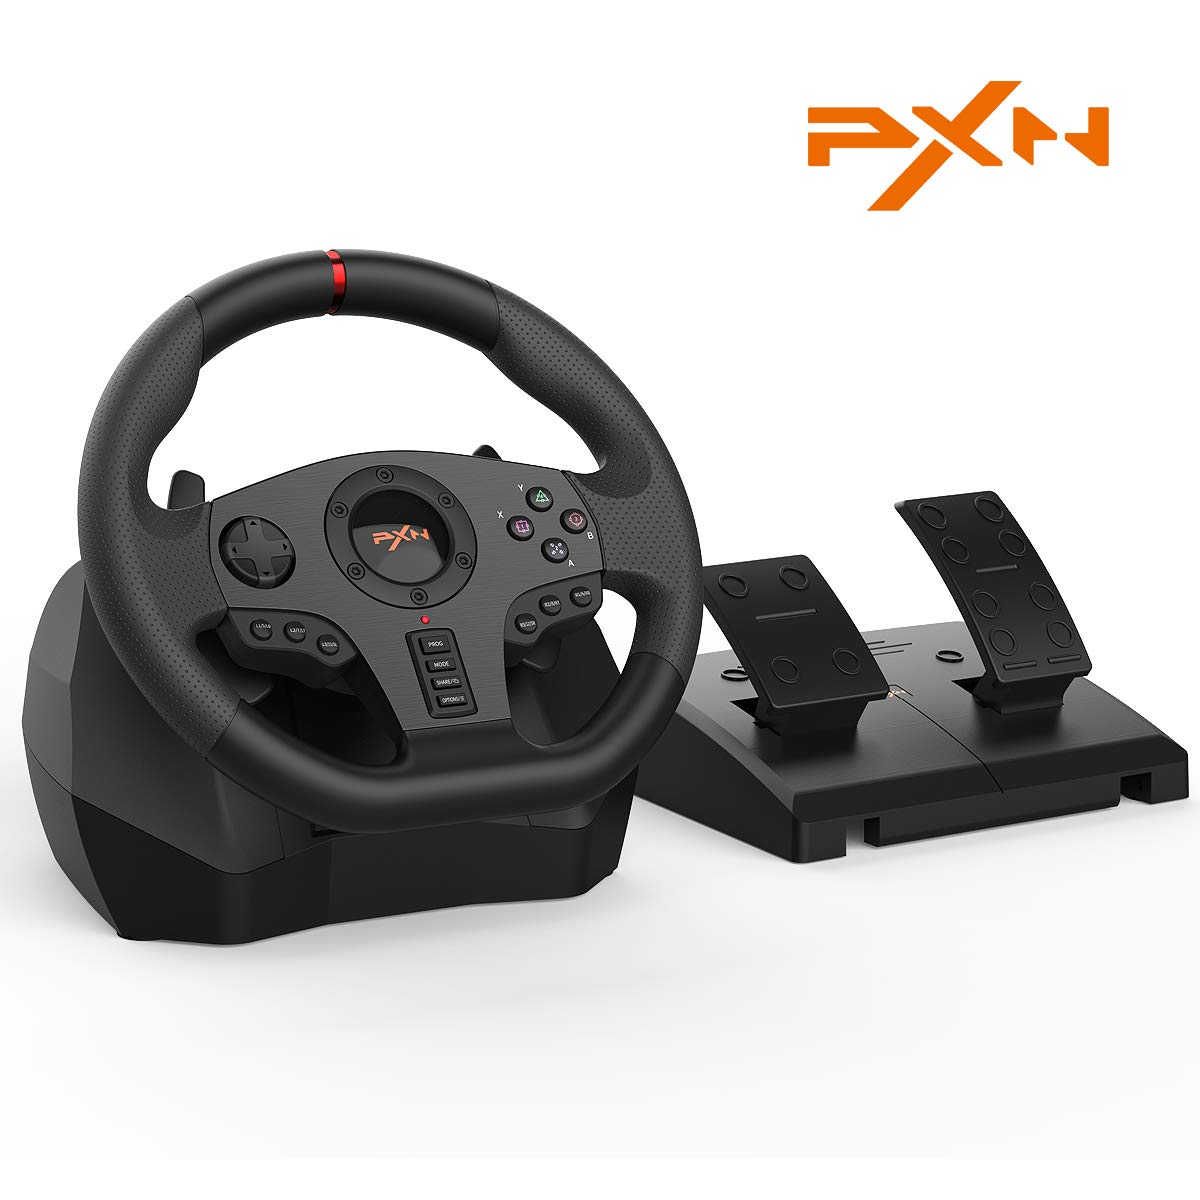 PXN V900 Gaming Steering Wheel - With Pedals and Joystick